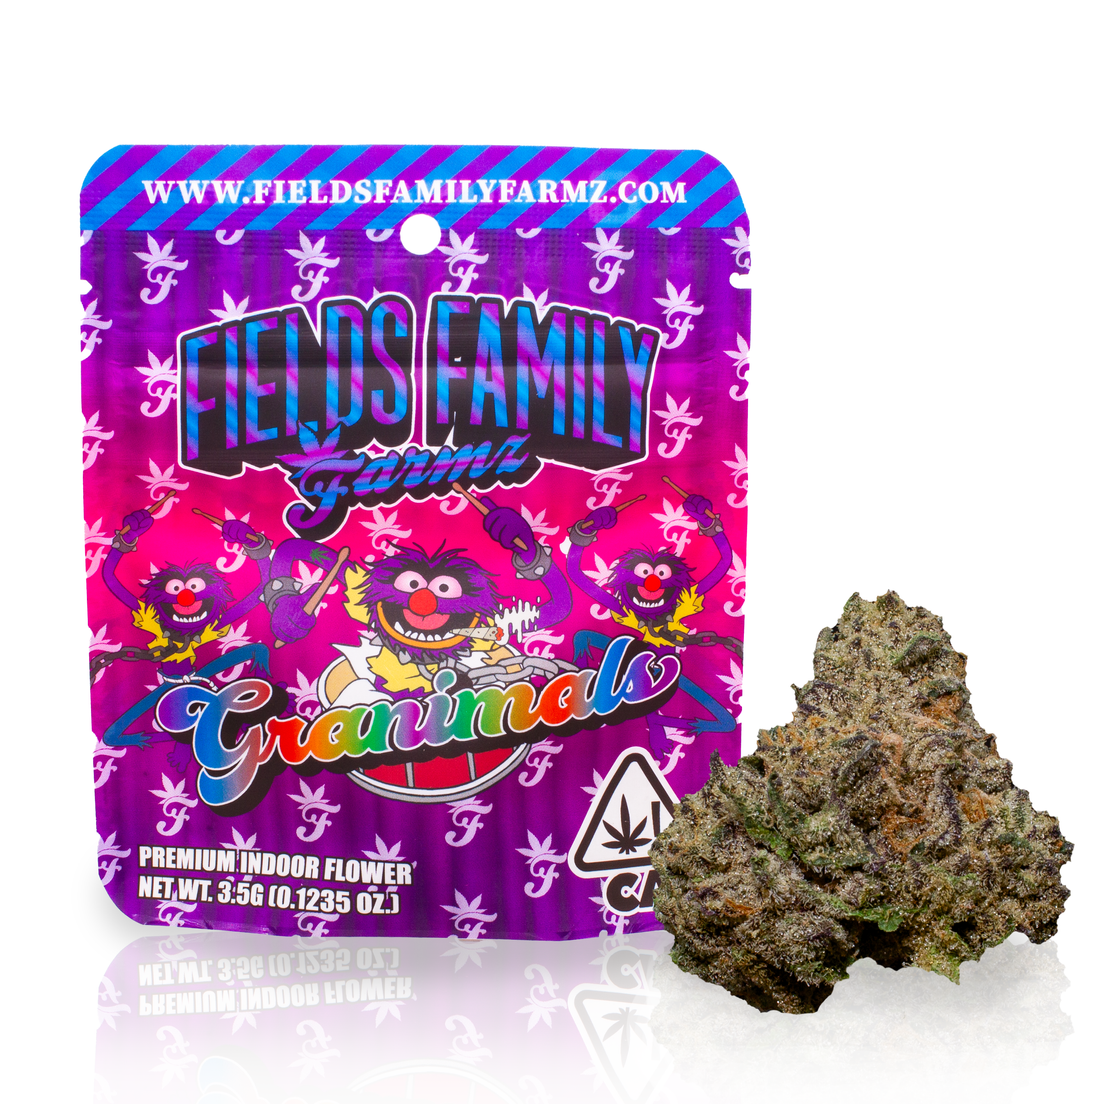 HOTBOX™ - Scotty's Mom Indica (14g or 1/2 oz) Indoor Flower 14.00g 